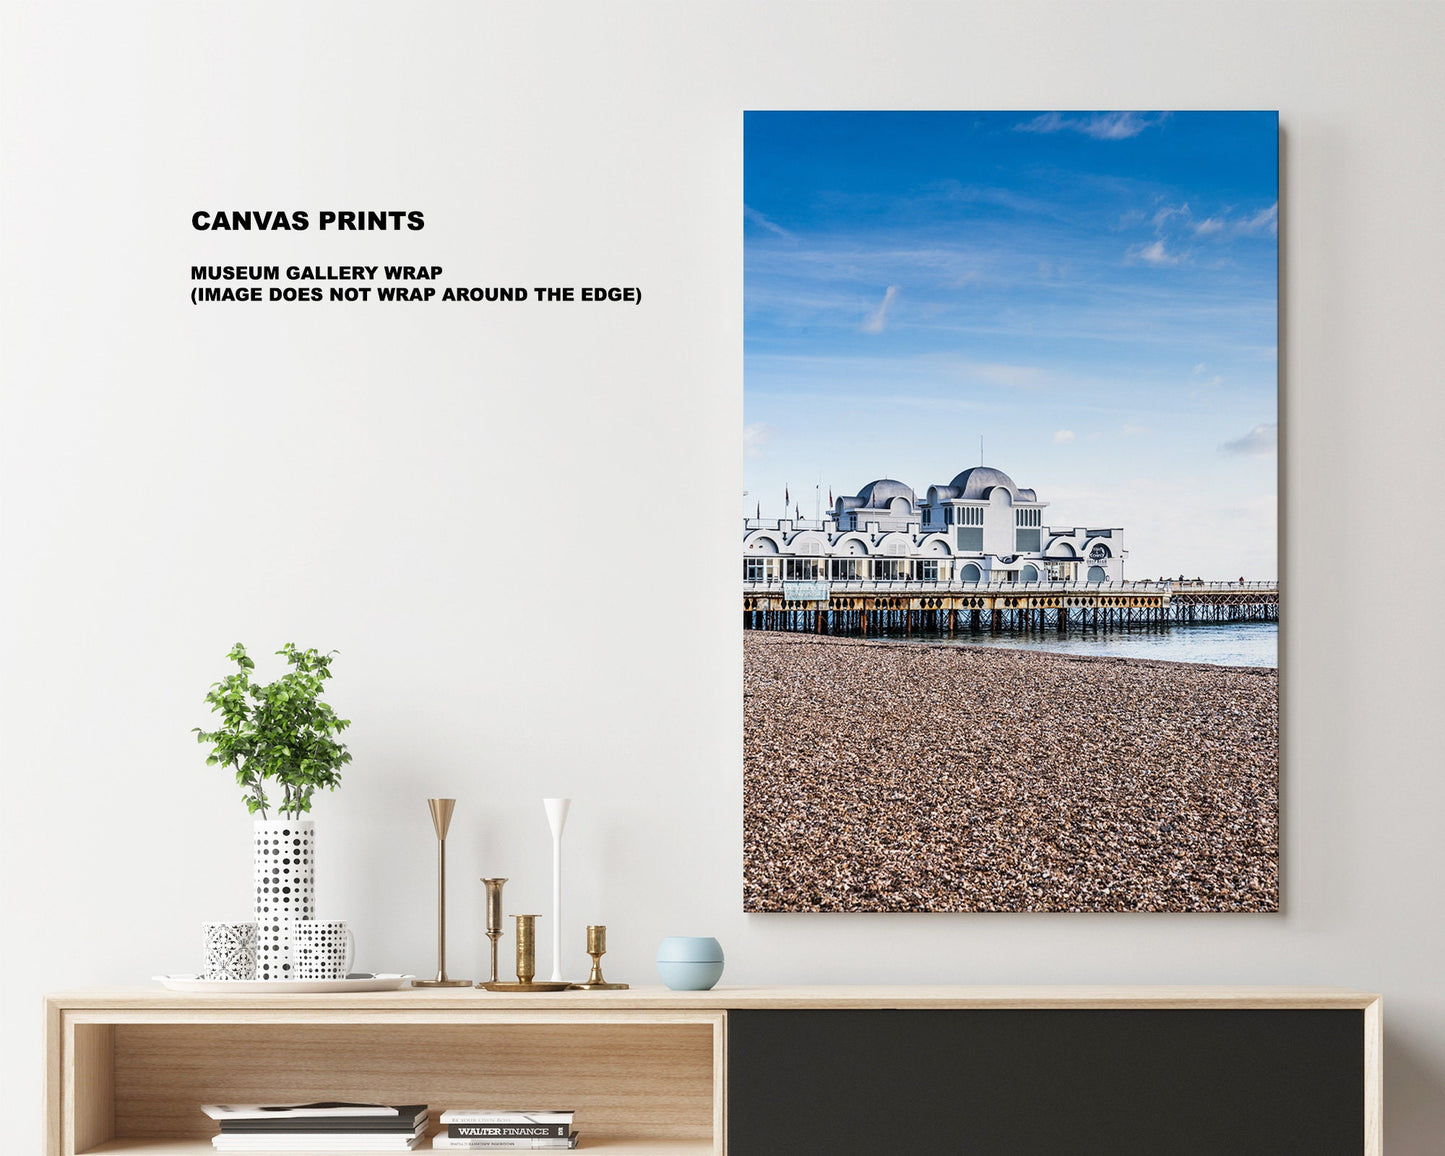 South Parade Pier - Photography Print - Portsmouth and Southsea Prints - Wall Art -  Frame and Canvas Options - Portrait